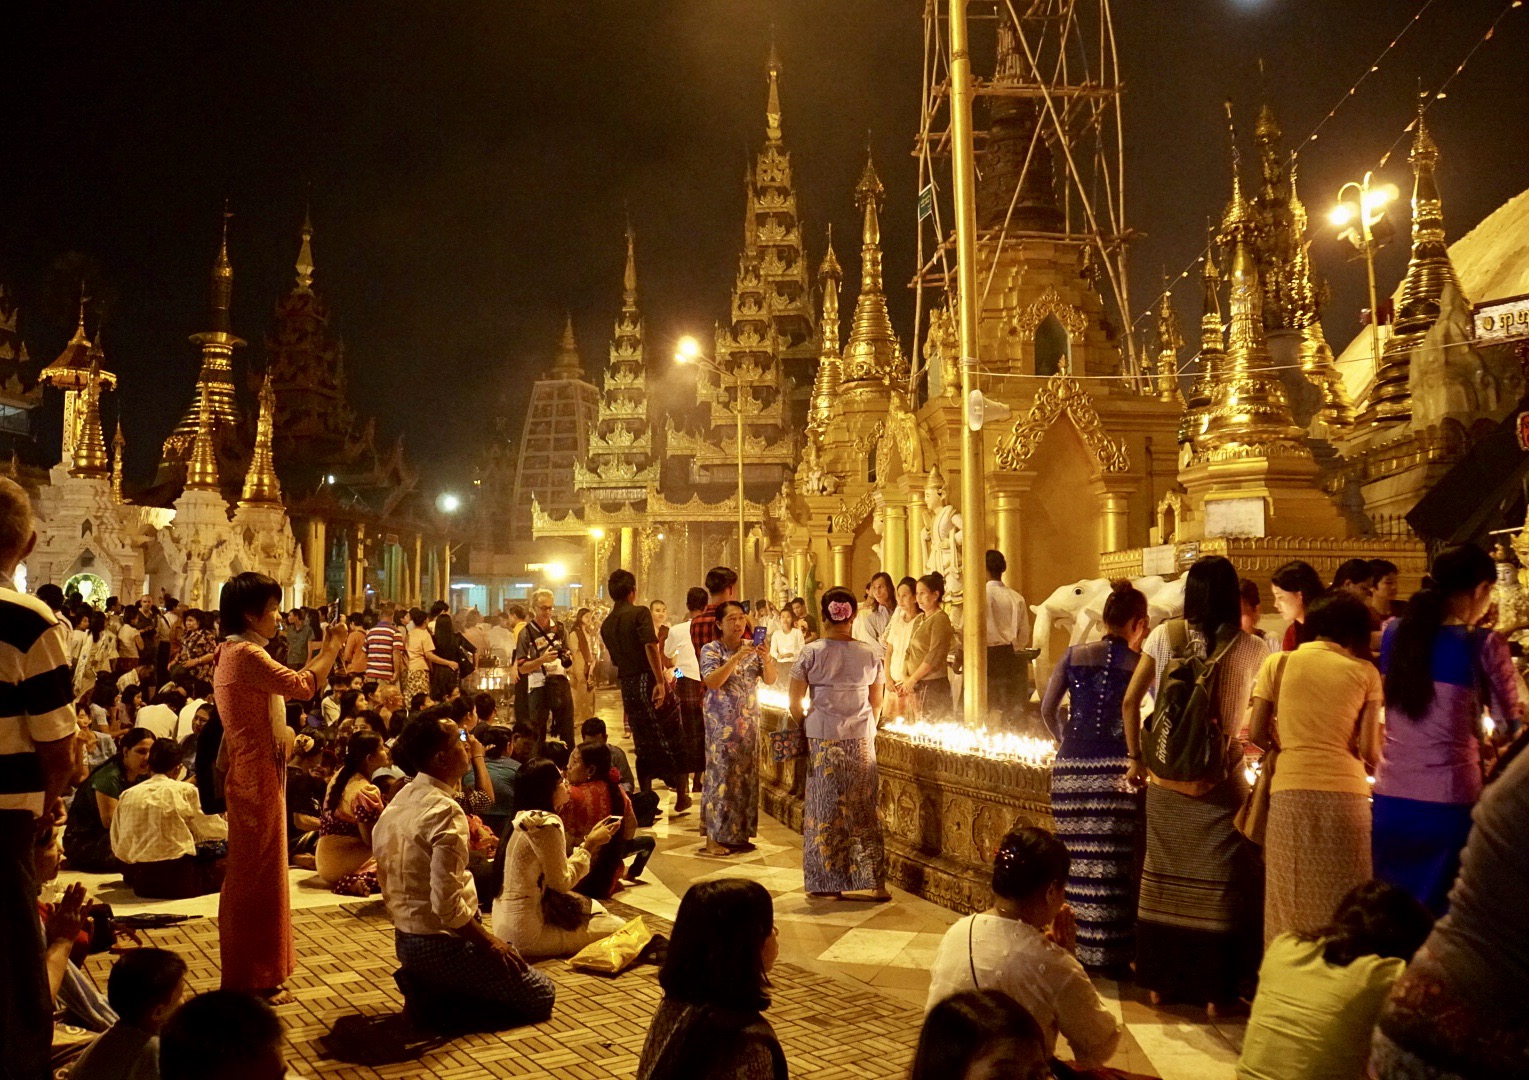 Tazaungdaing Festival, Shwedagon Pagoda, Yangon: 
The Tazaungdaing Festival is held on the full moon day of Tazaungmon, the eighth month of the Burmese calendar. The festival marks the end of the rainy season and the end of the Kathina season, during which monks are offered new robes and alms.